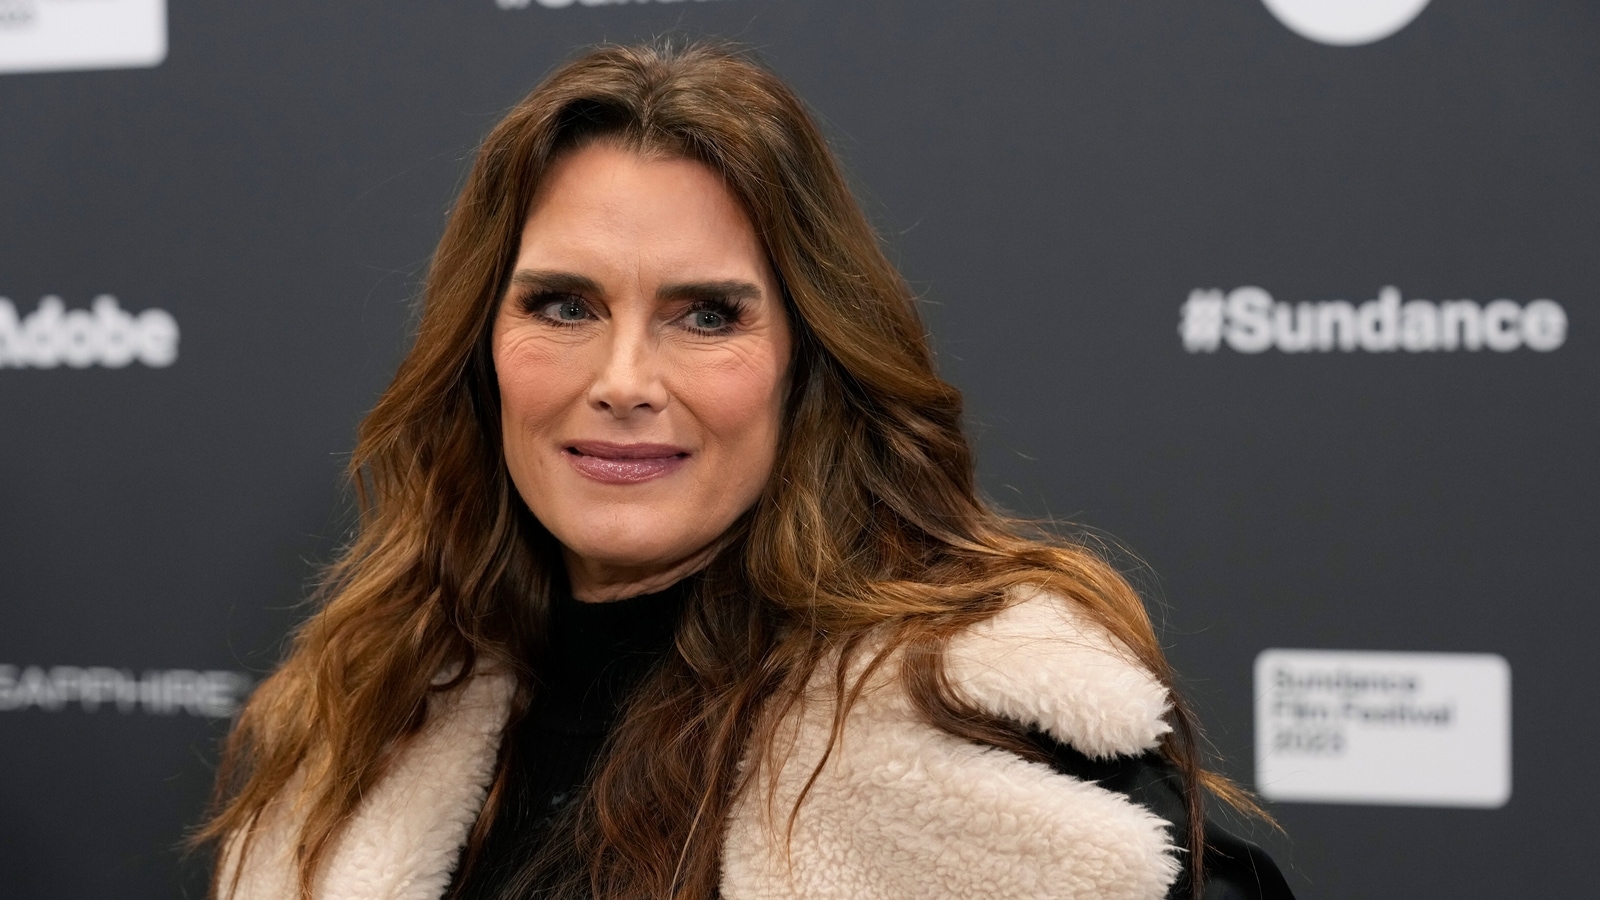 Actor Brooke Shields alleges rape in new documentary